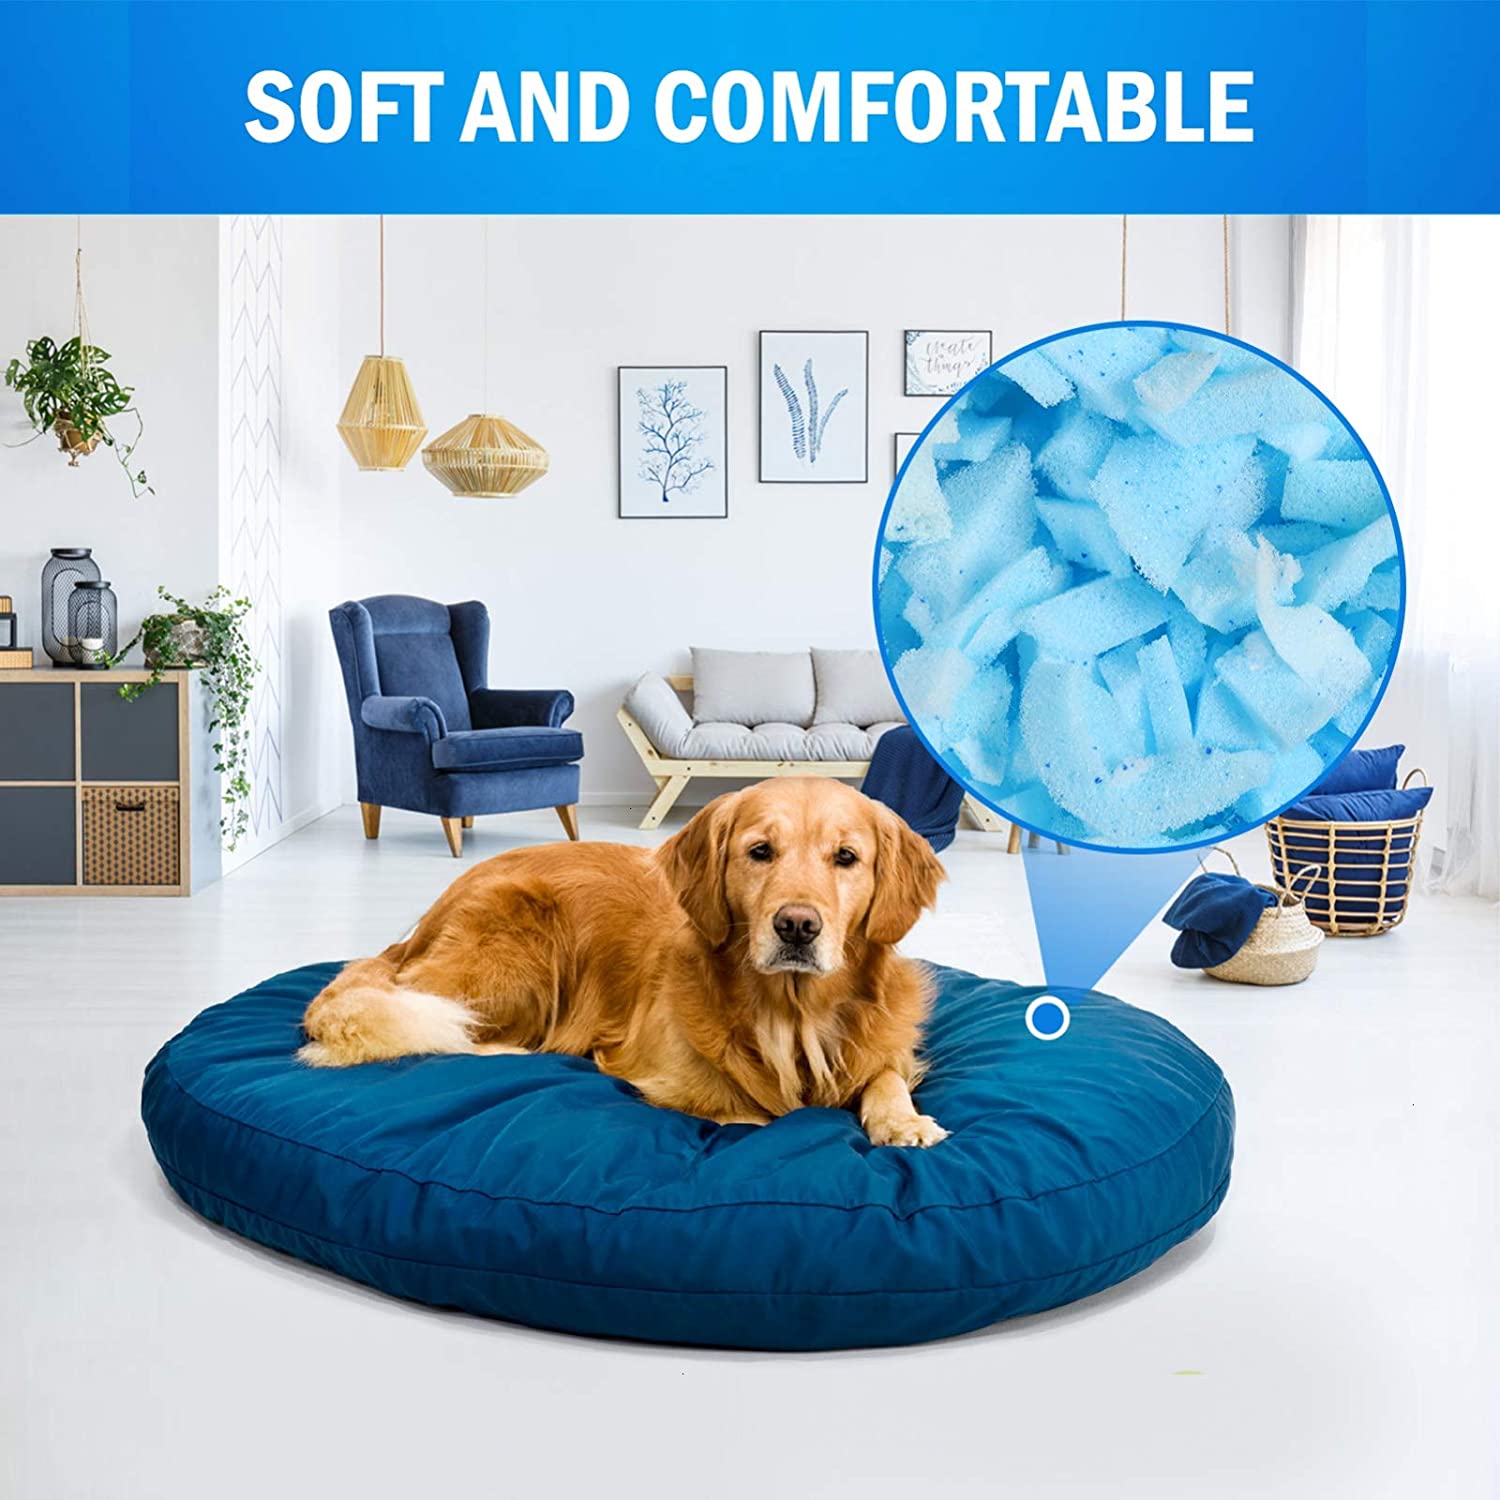 Hem Dgpsy 15lbs Shredded Gel Memory Foam Filling for Bean Bag Chair, Memory  Foam Stuffing for Cooling Pillow, Couch, Pouf Beanbag Chair, Dog Bed,  Cushion, Art Crafts, Welcome to consult 